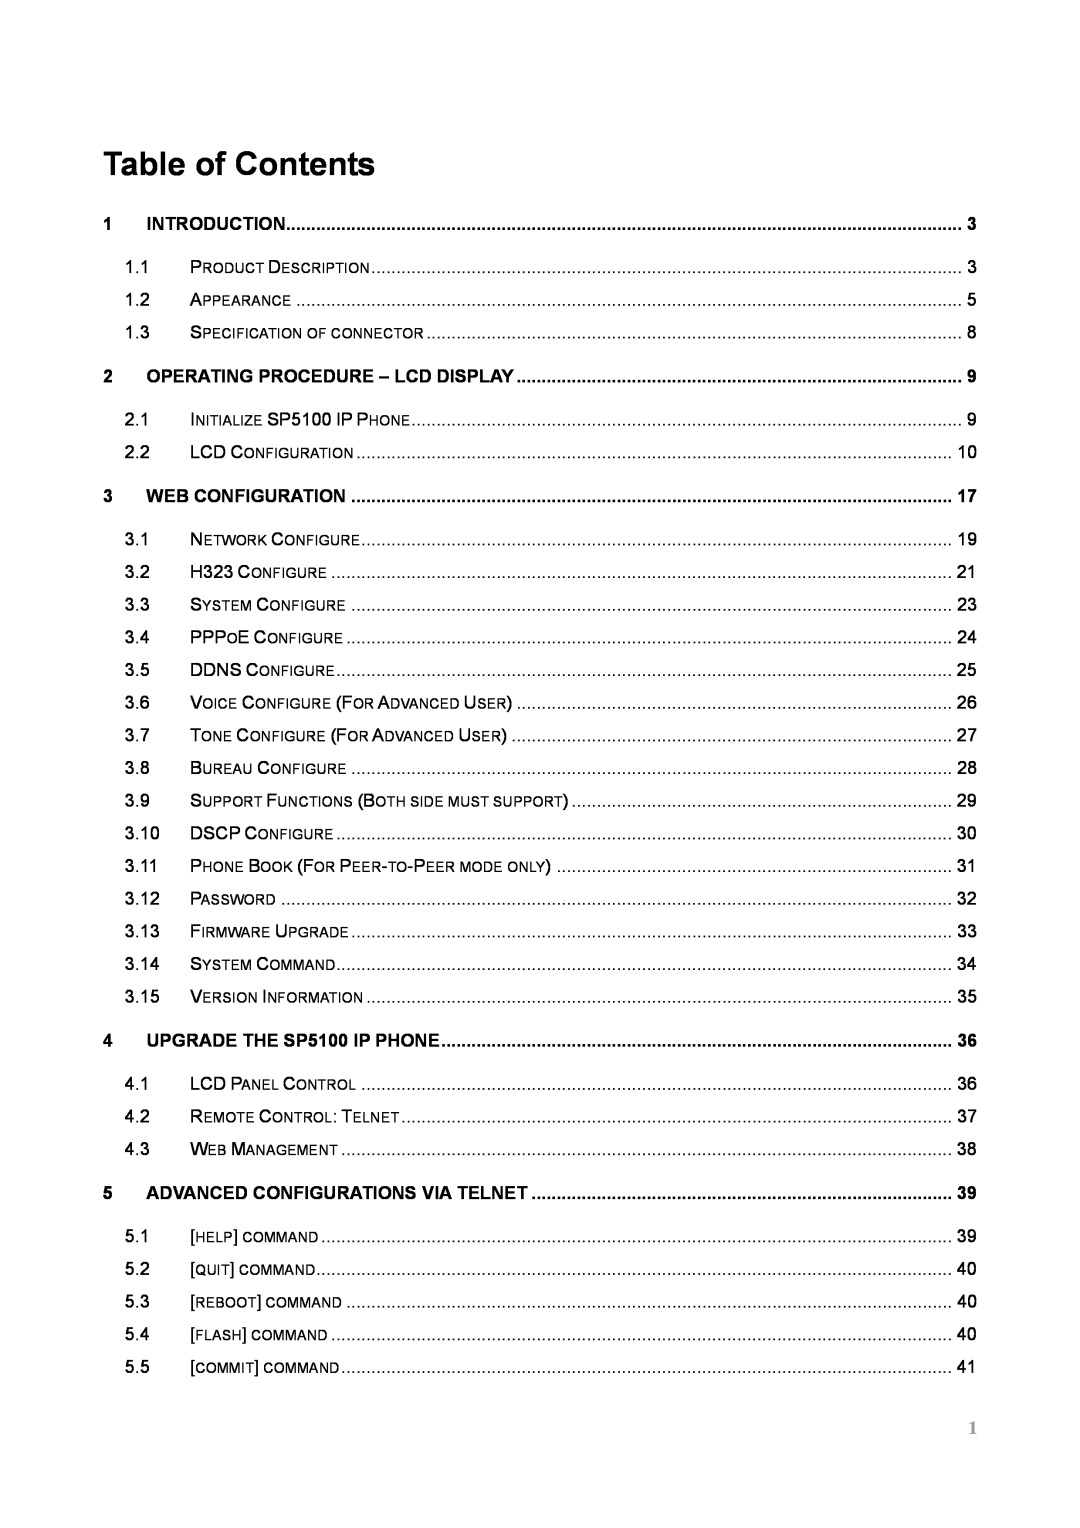 MicroNet Technology SP5100 user manual Table of Contents, Advanced Configurations Via Telnet 